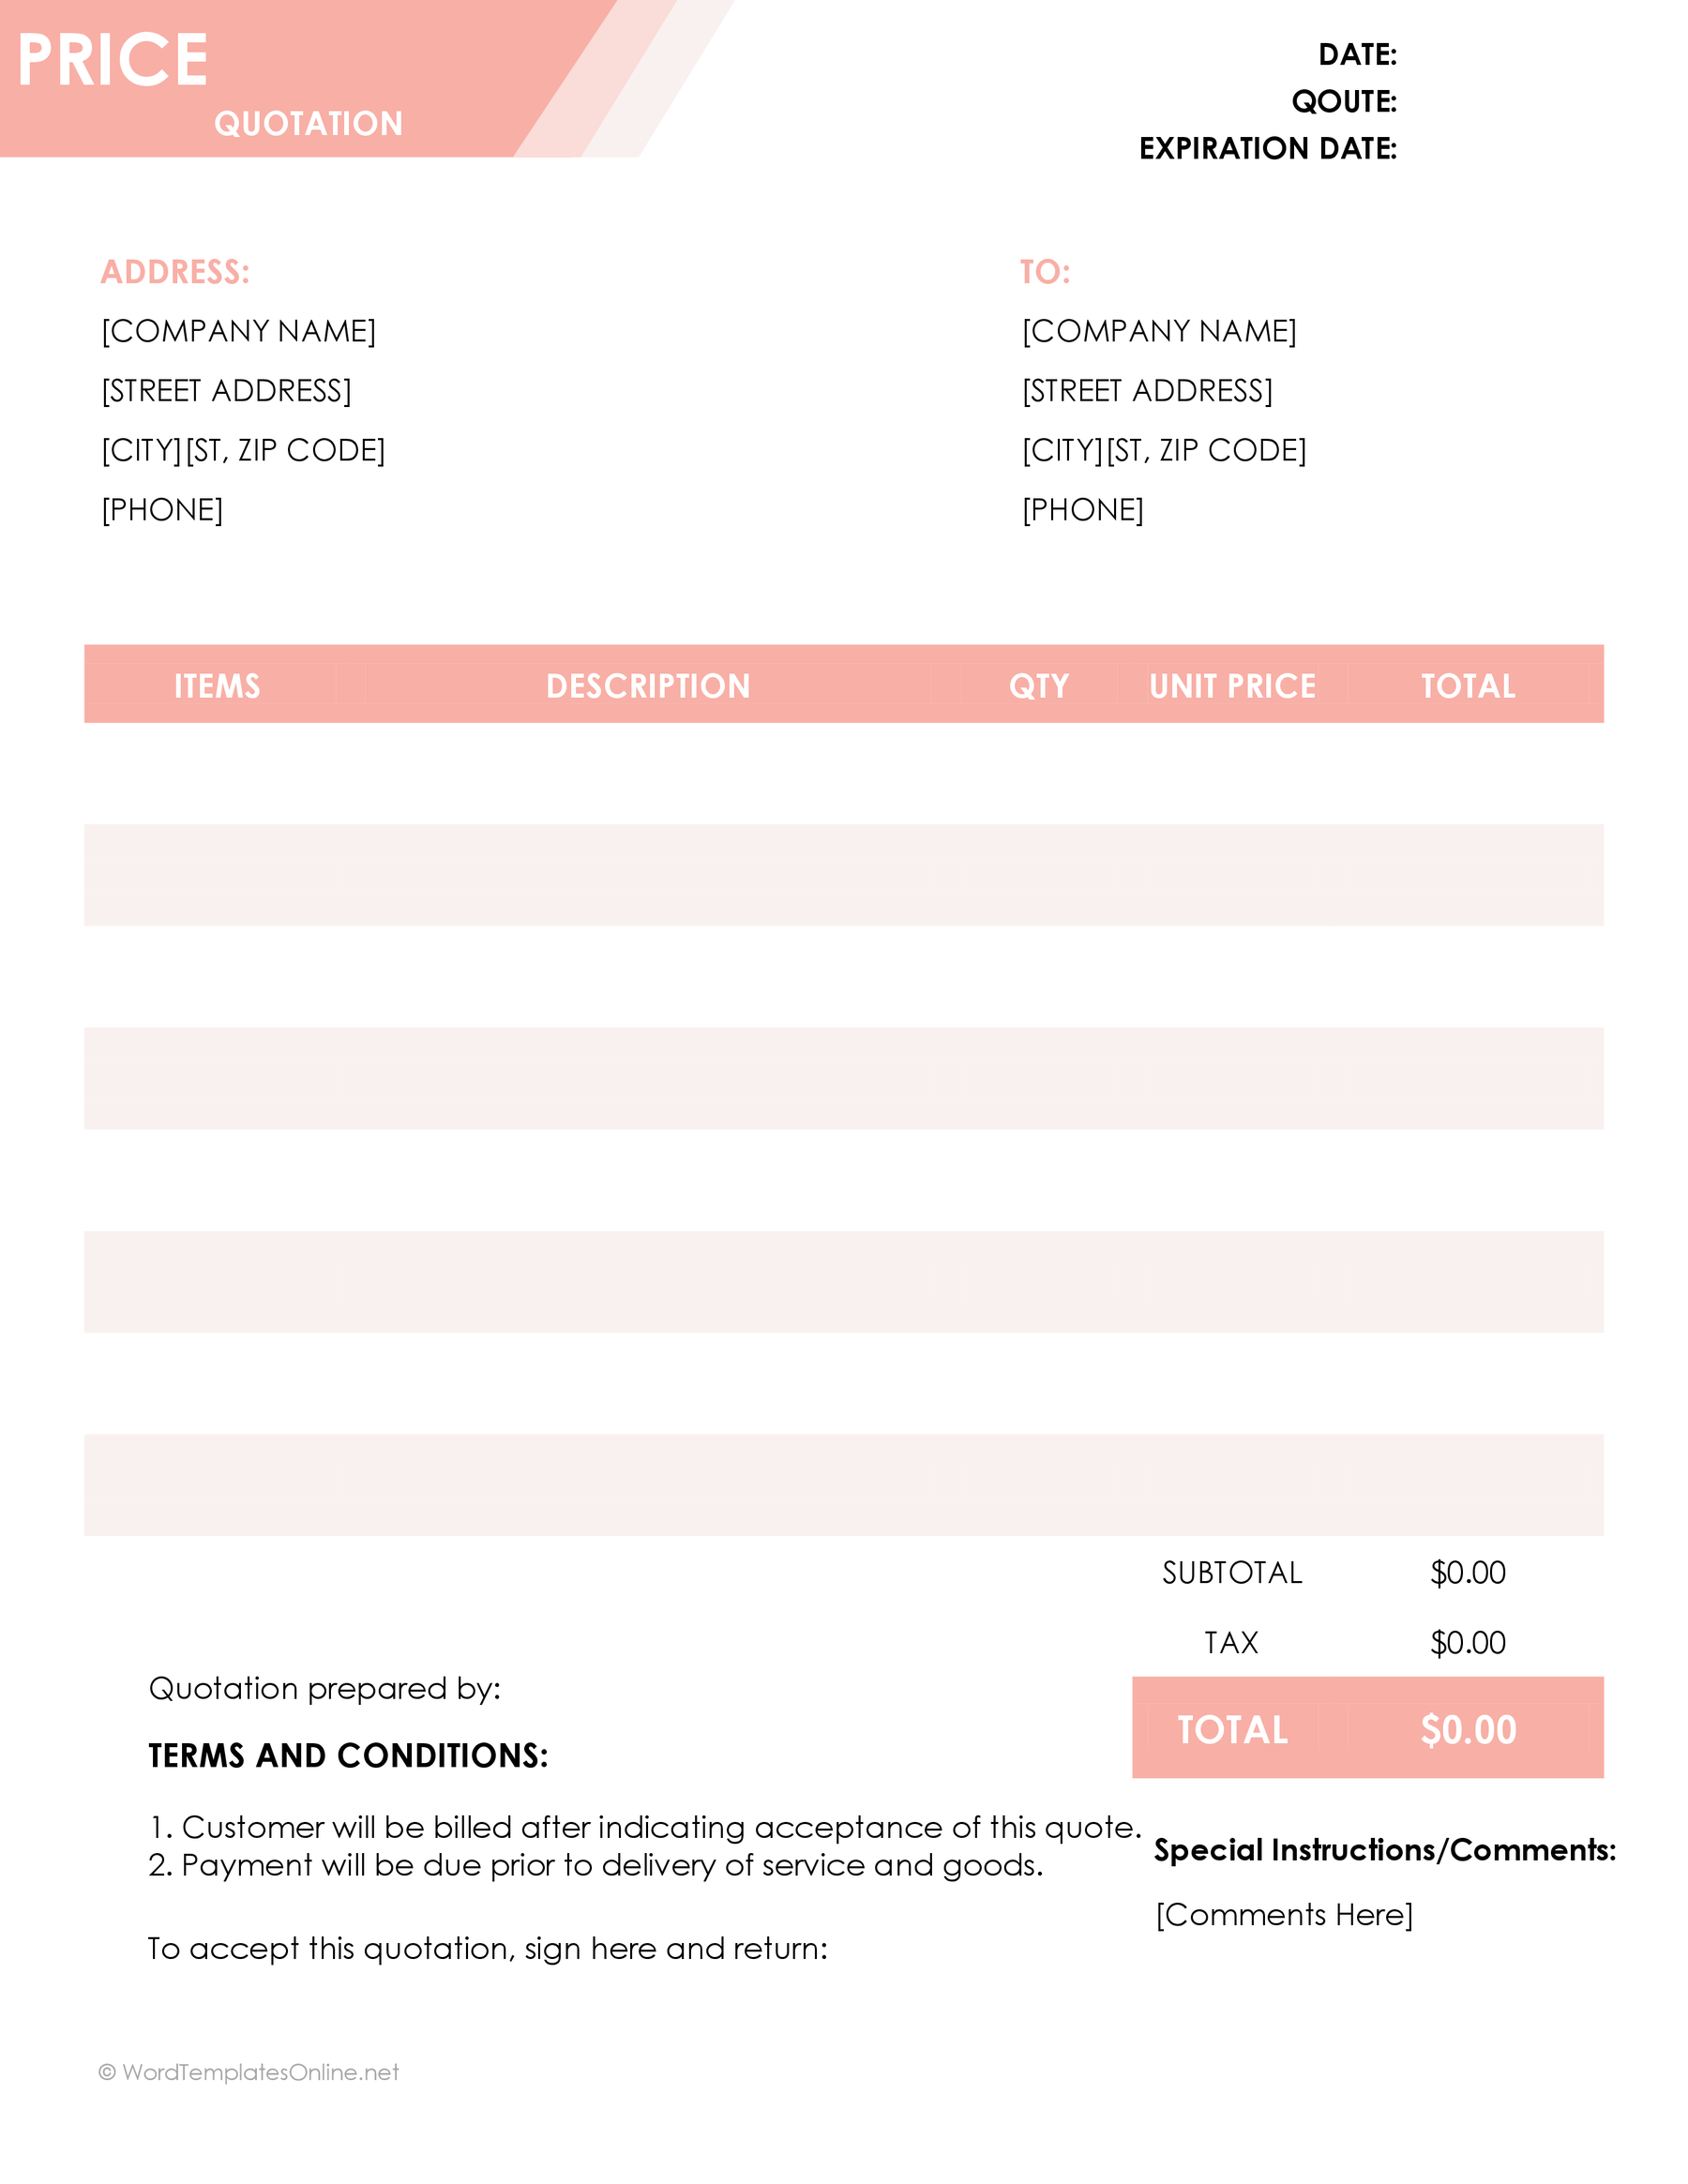 Price Quotation Template Free download in Ms Word